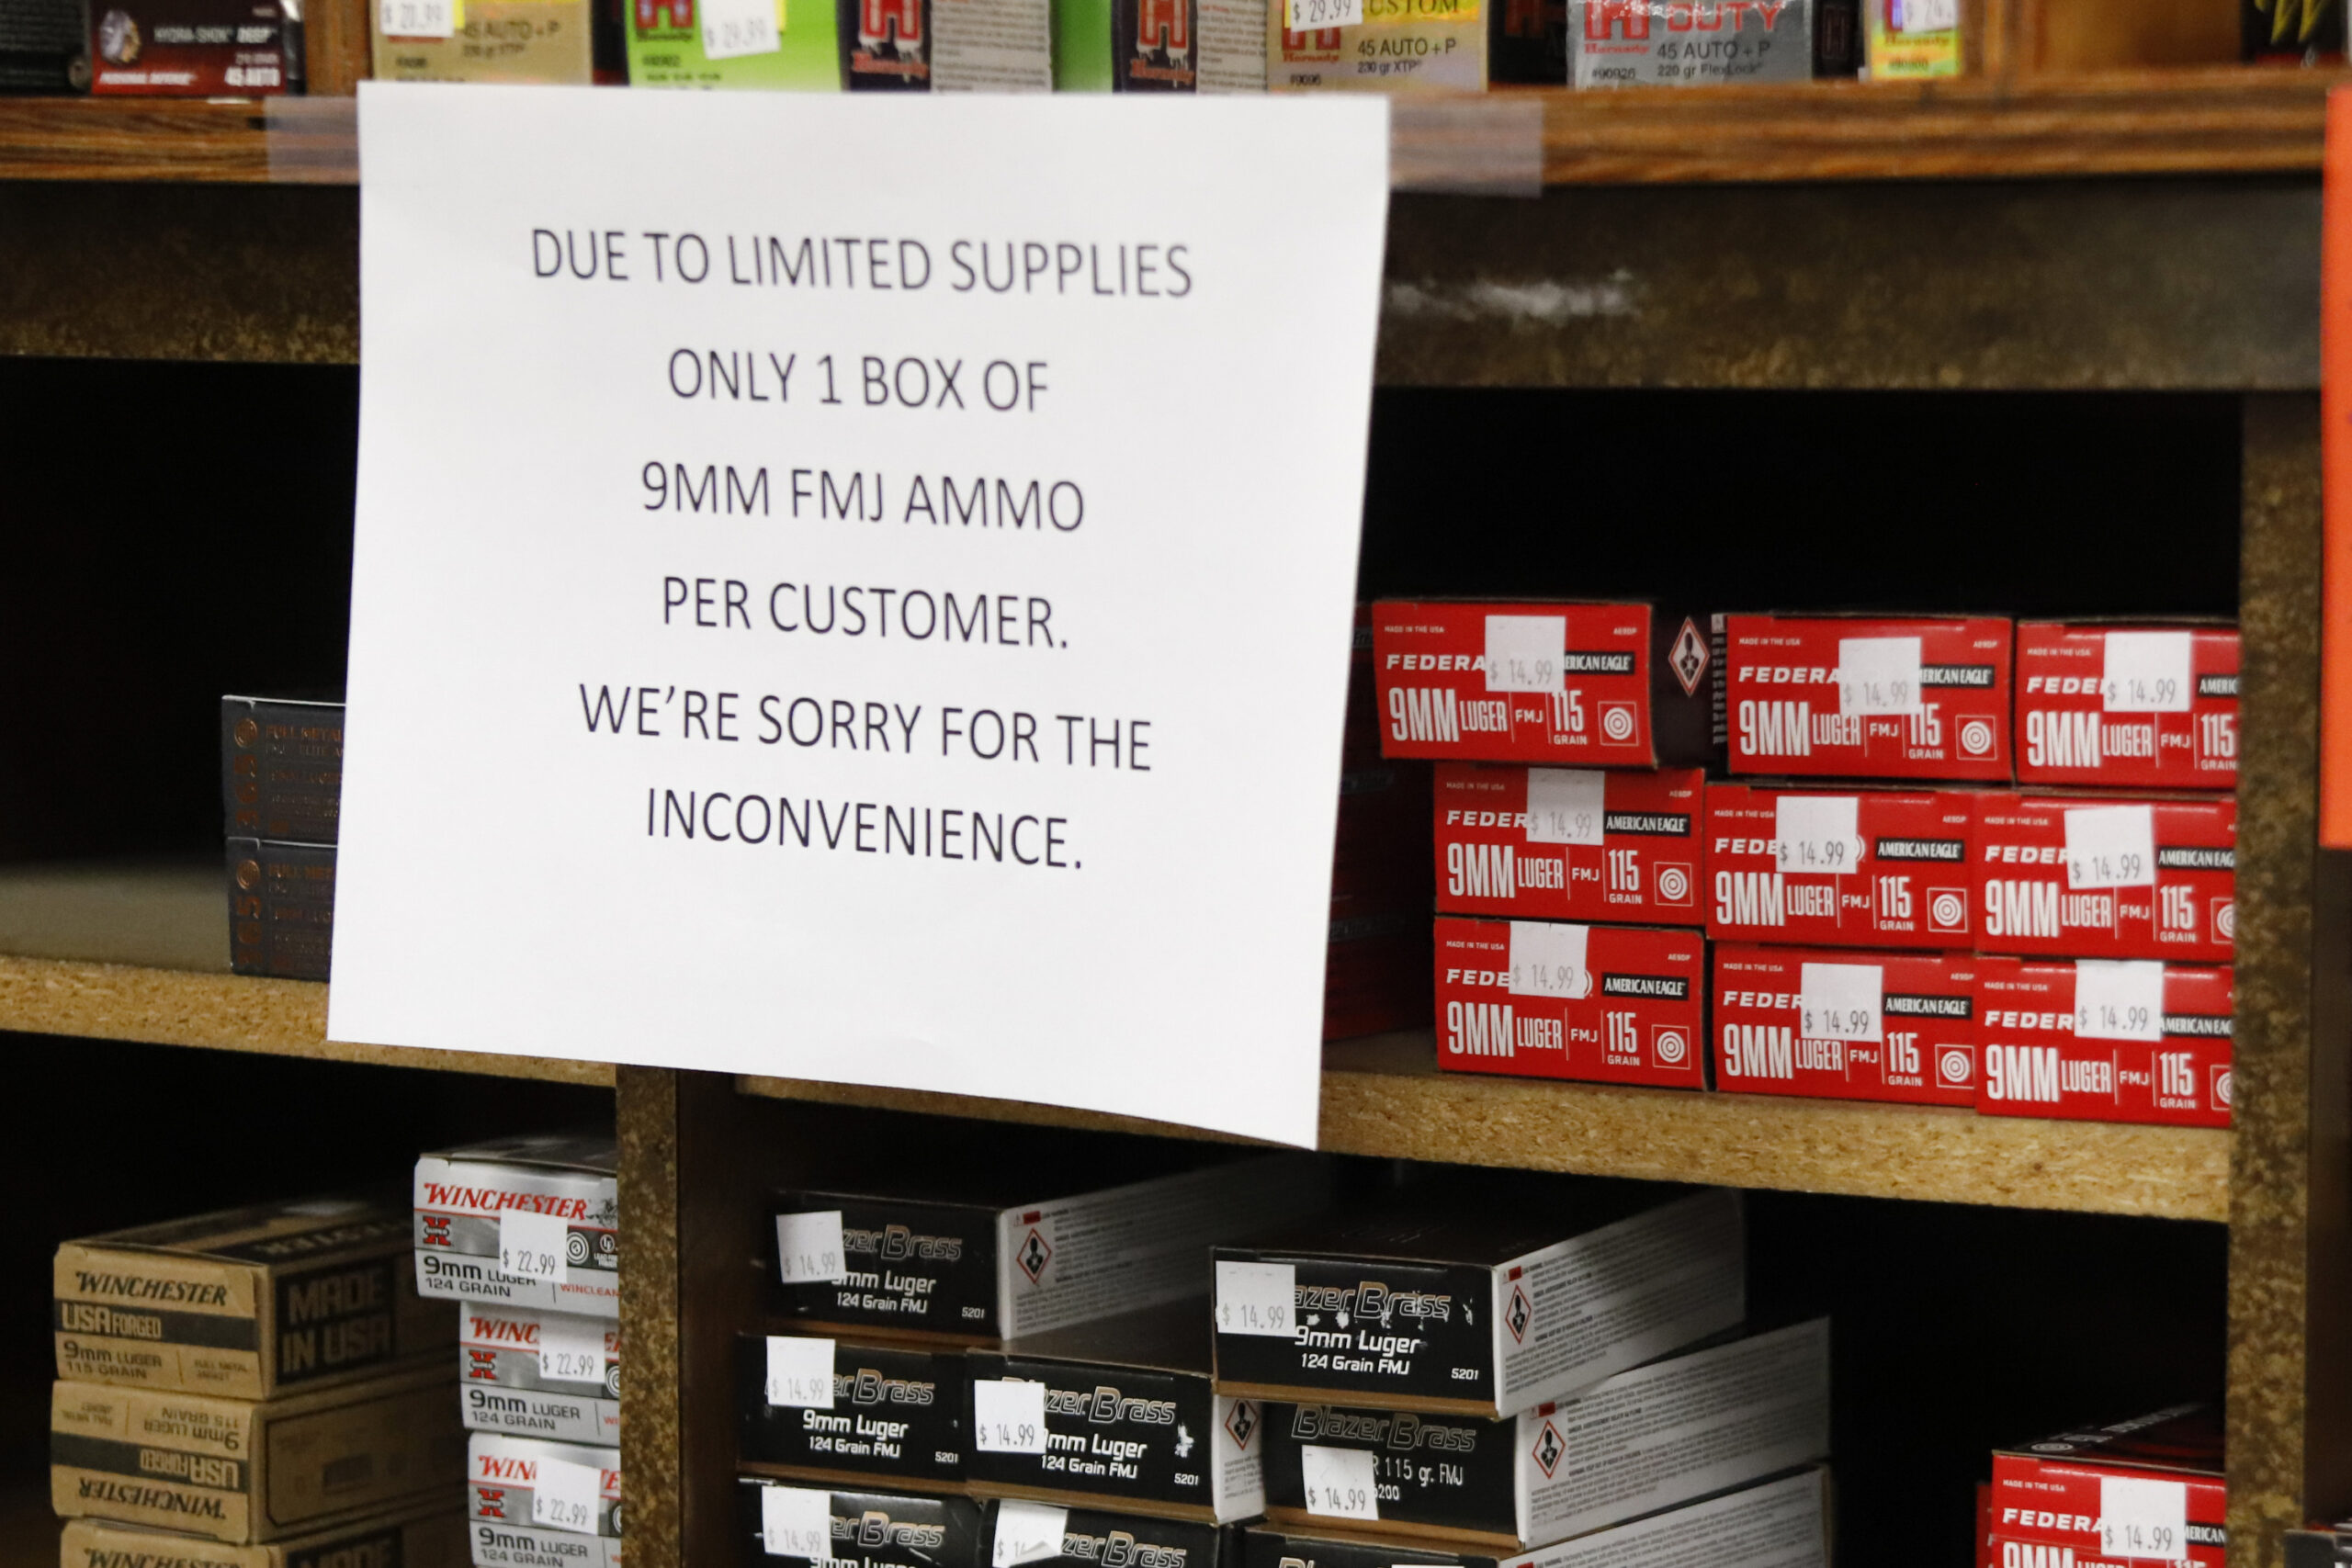 Signs point out quantity limits on certain types of ammunition